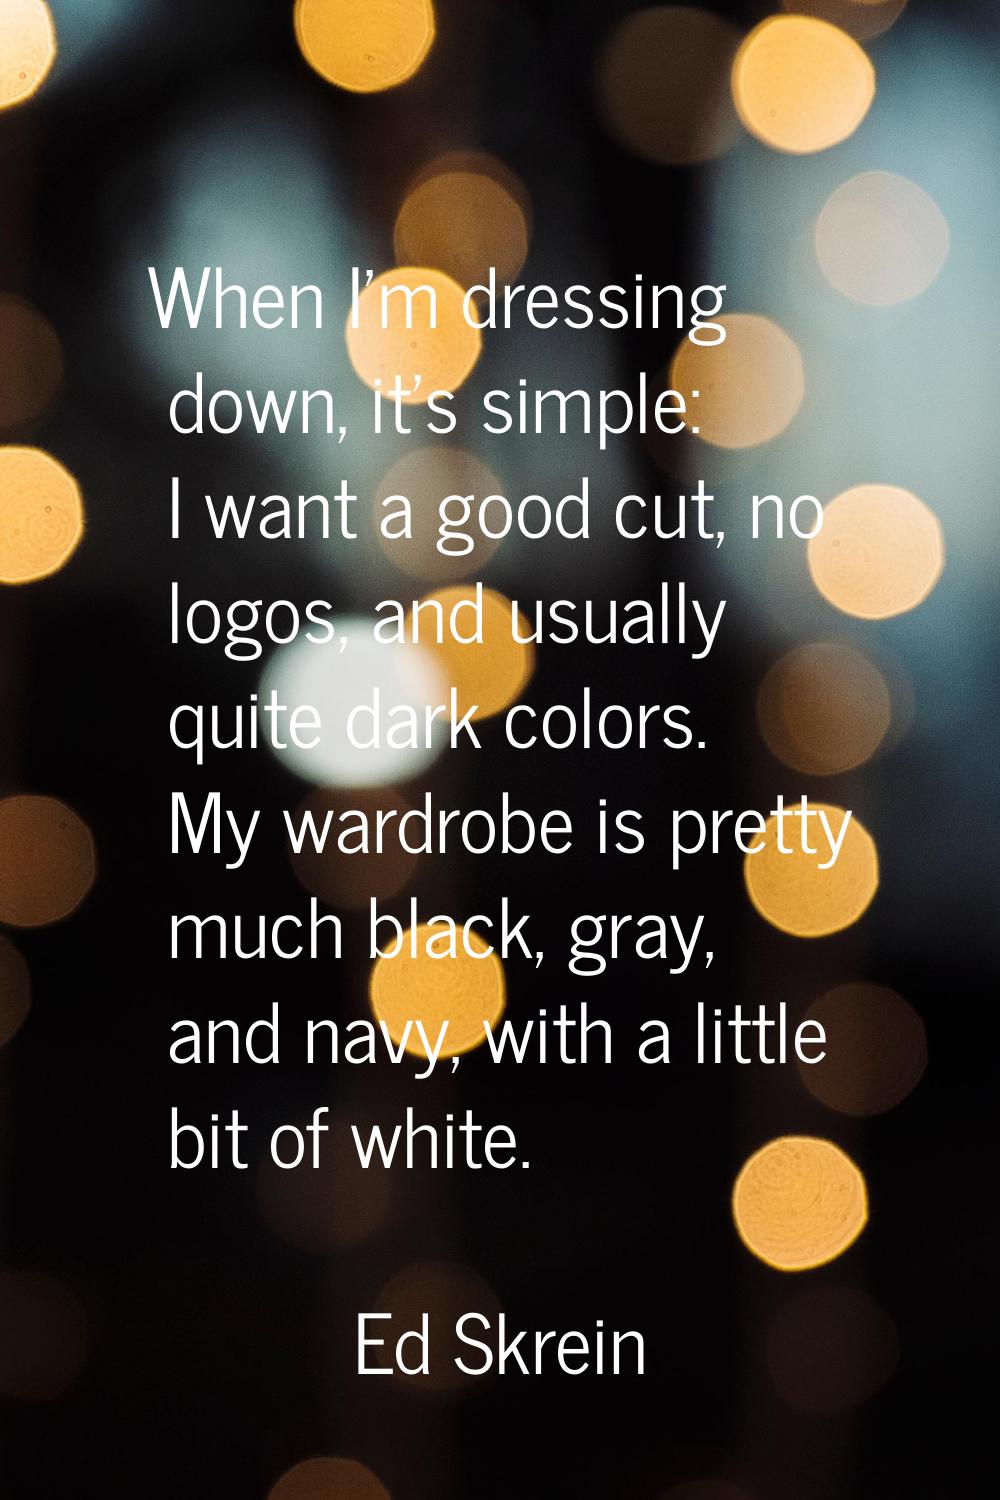 When I'm dressing down, it's simple: I want a good cut, no logos, and usually quite dark colors. My